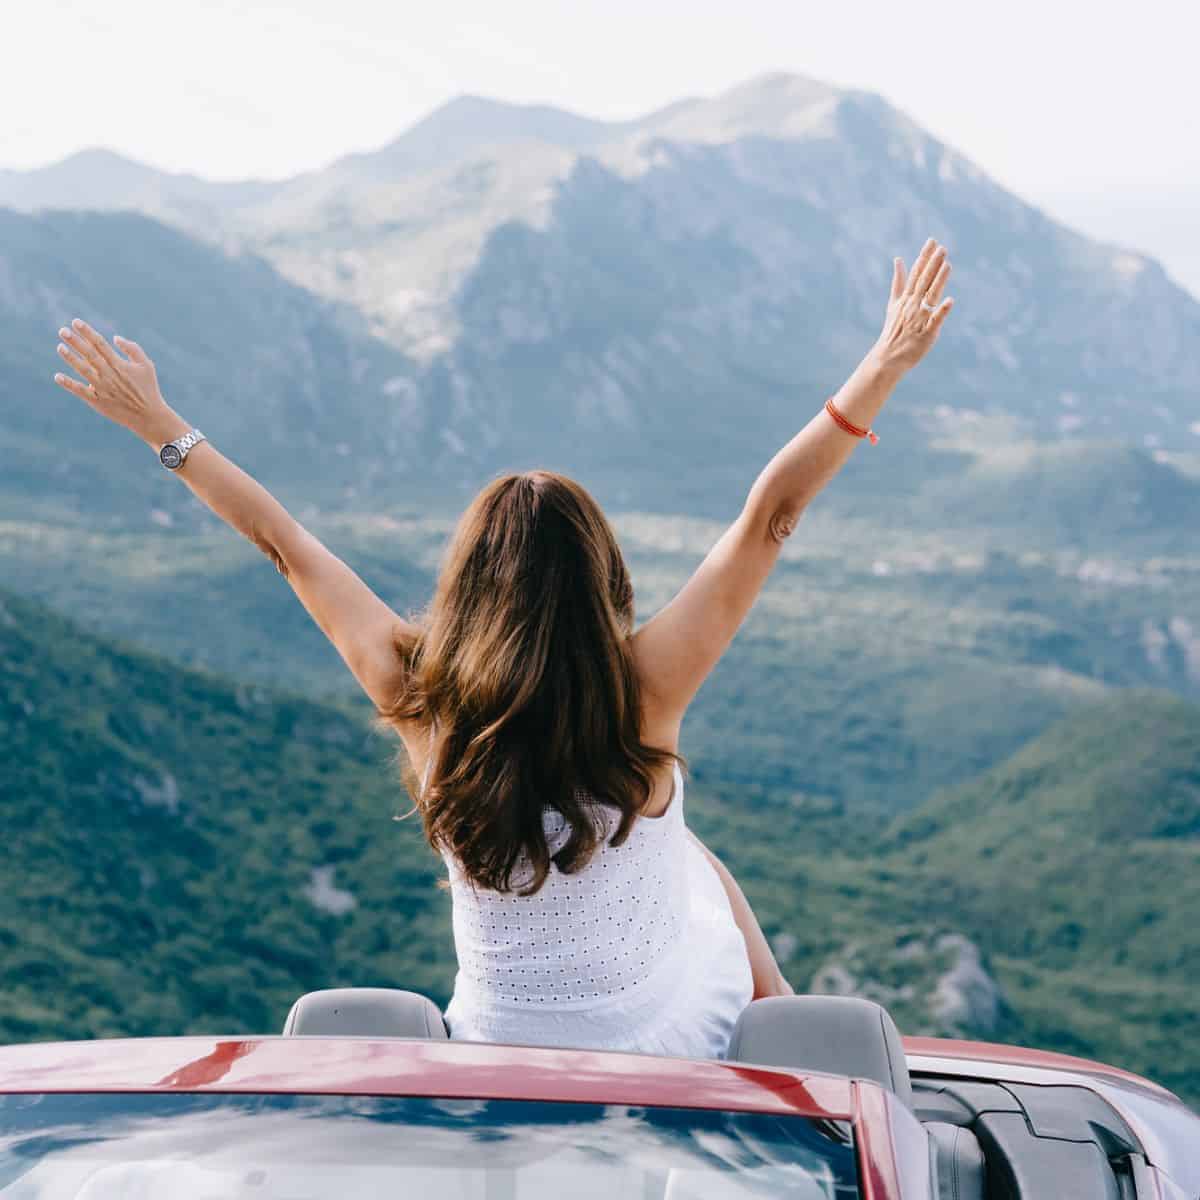 Woman with long dark hair and a white sleeveless outfit sitting on the back of a convertible sportscar. Her arms are raised in happiness as she looks a a lovely mountain view.